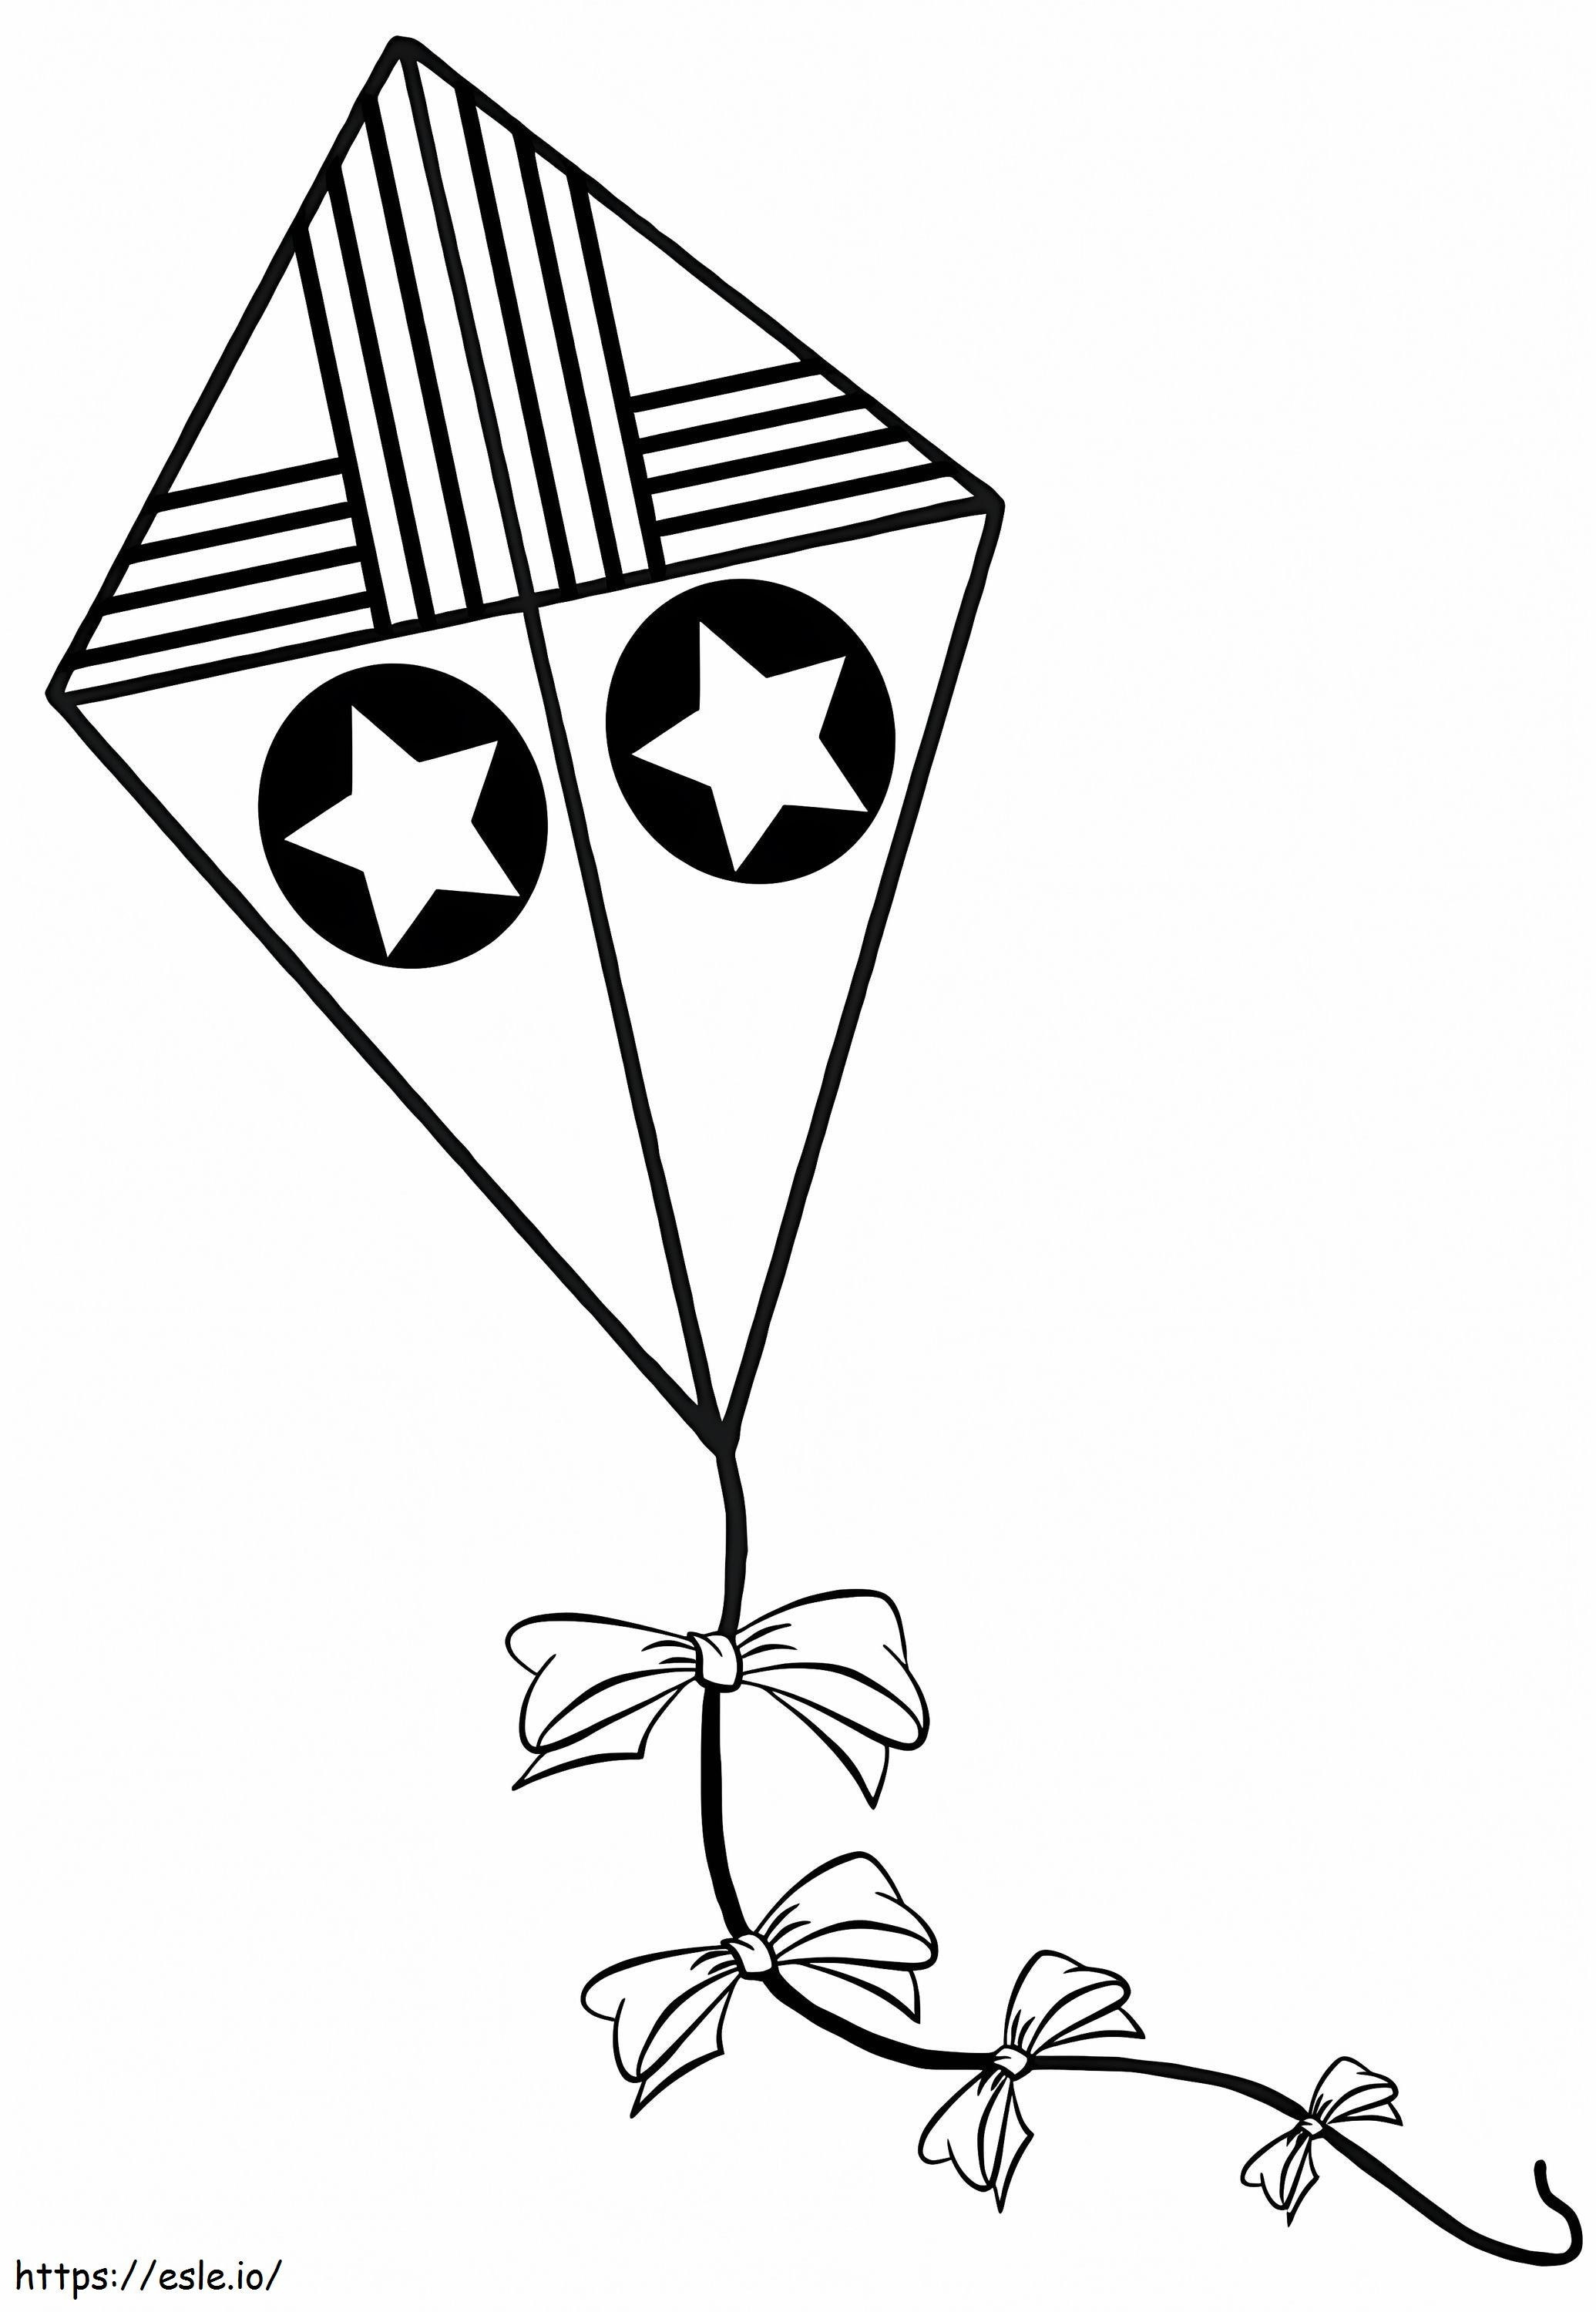 Kite 8 coloring page